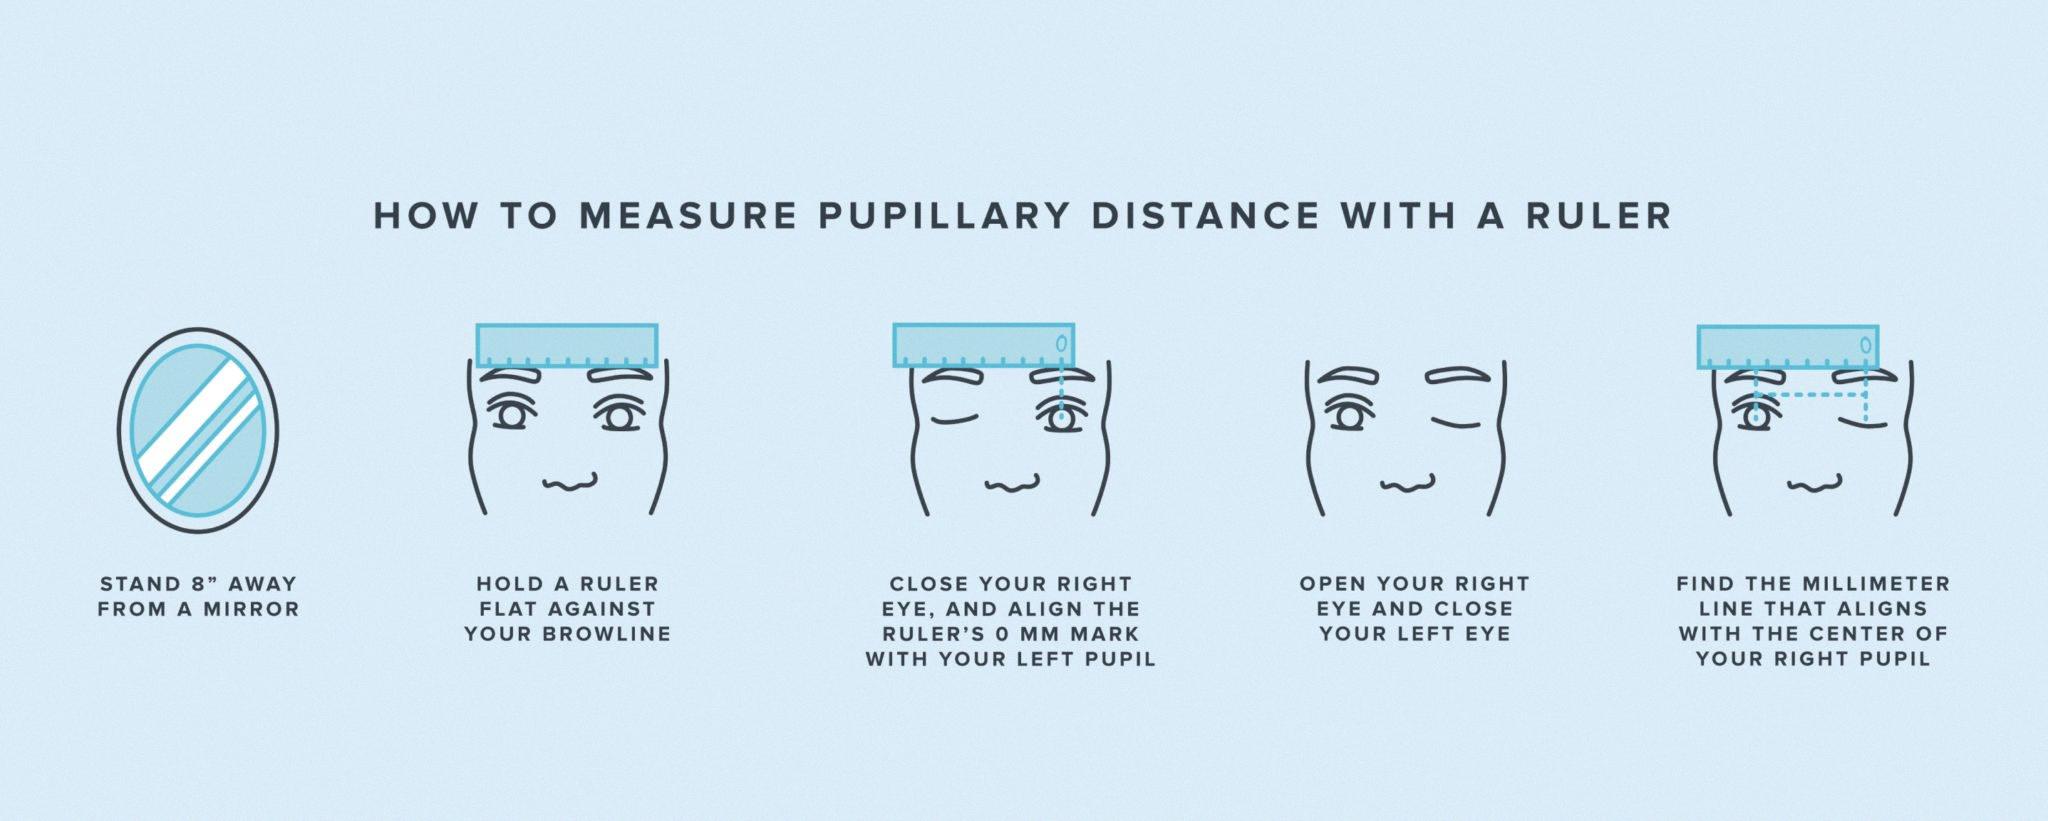 does pupillary distance change